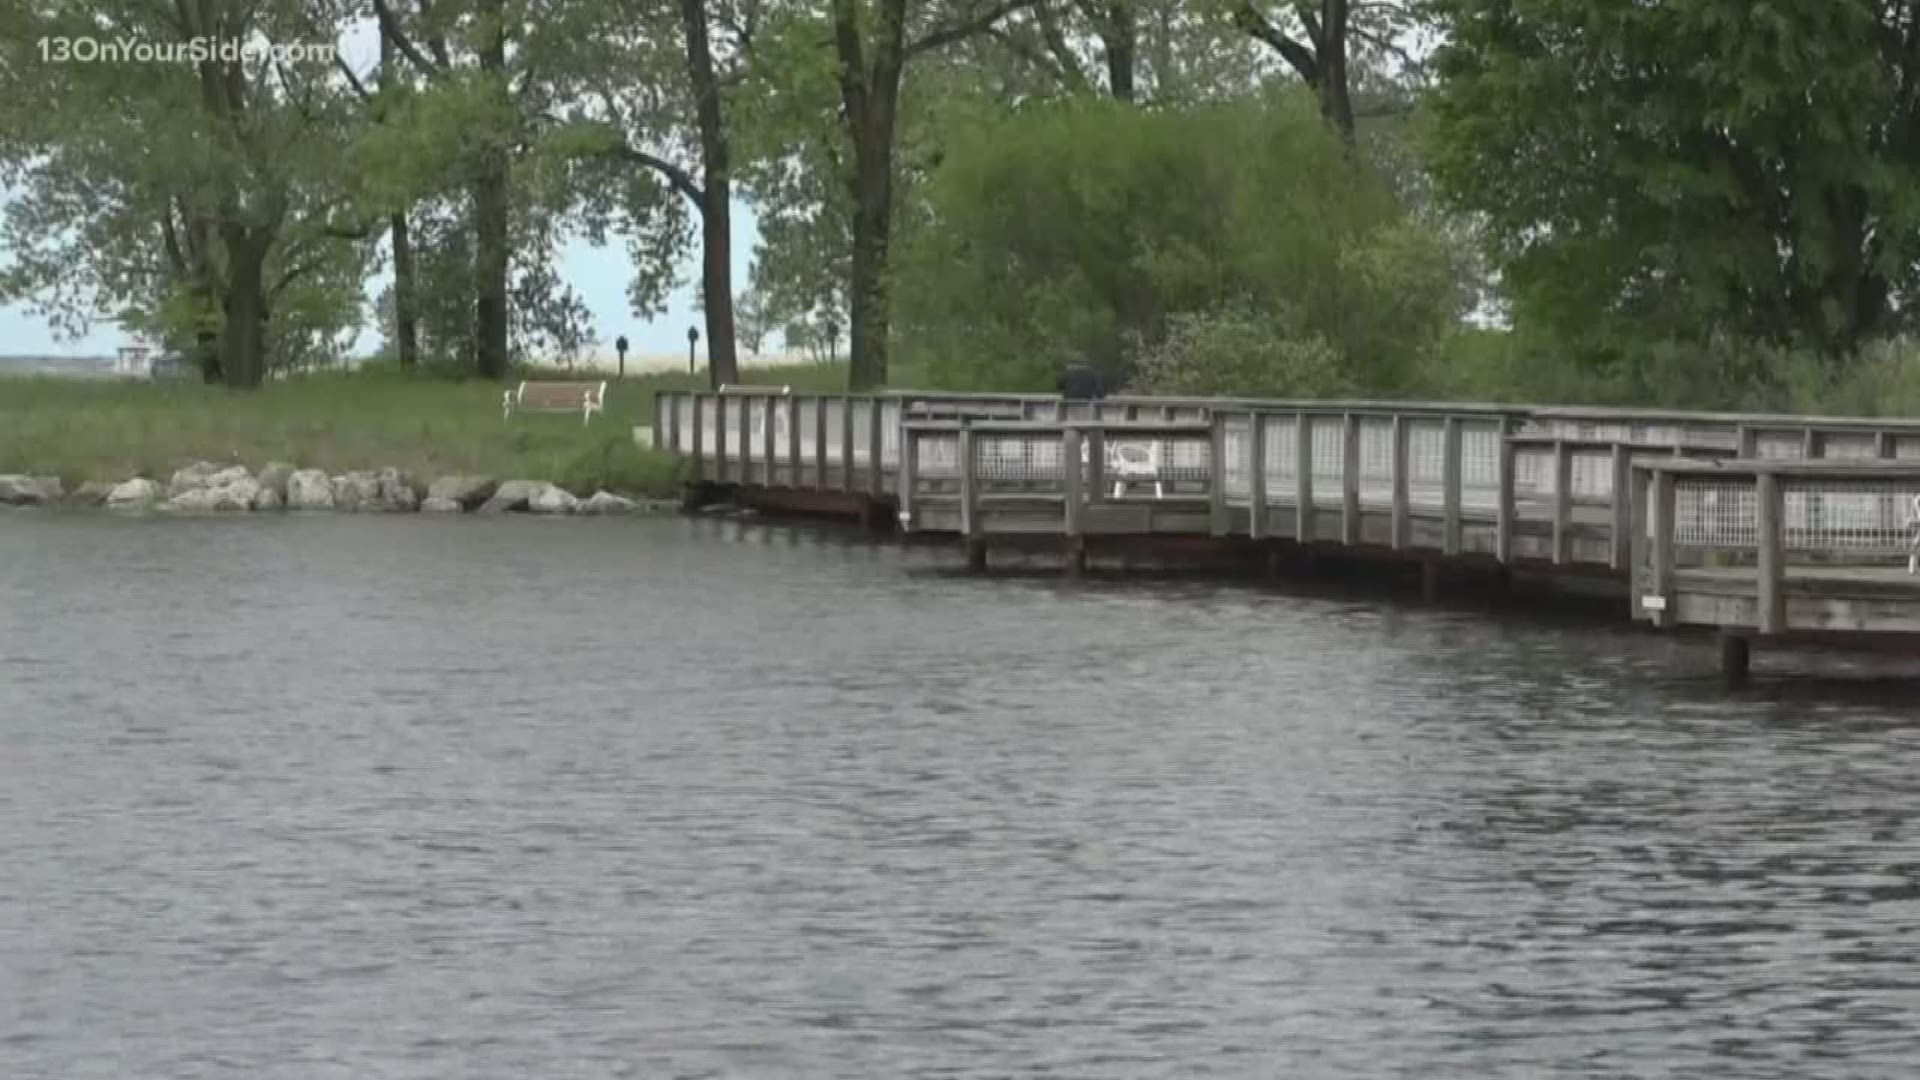 Testing in three Michigan waterways, the Kalamazoo  River, Spring Lake or Lake Macatawa, has turned up no trace of Asian carp that have damaged the environment and economy in other parts of the U.S.